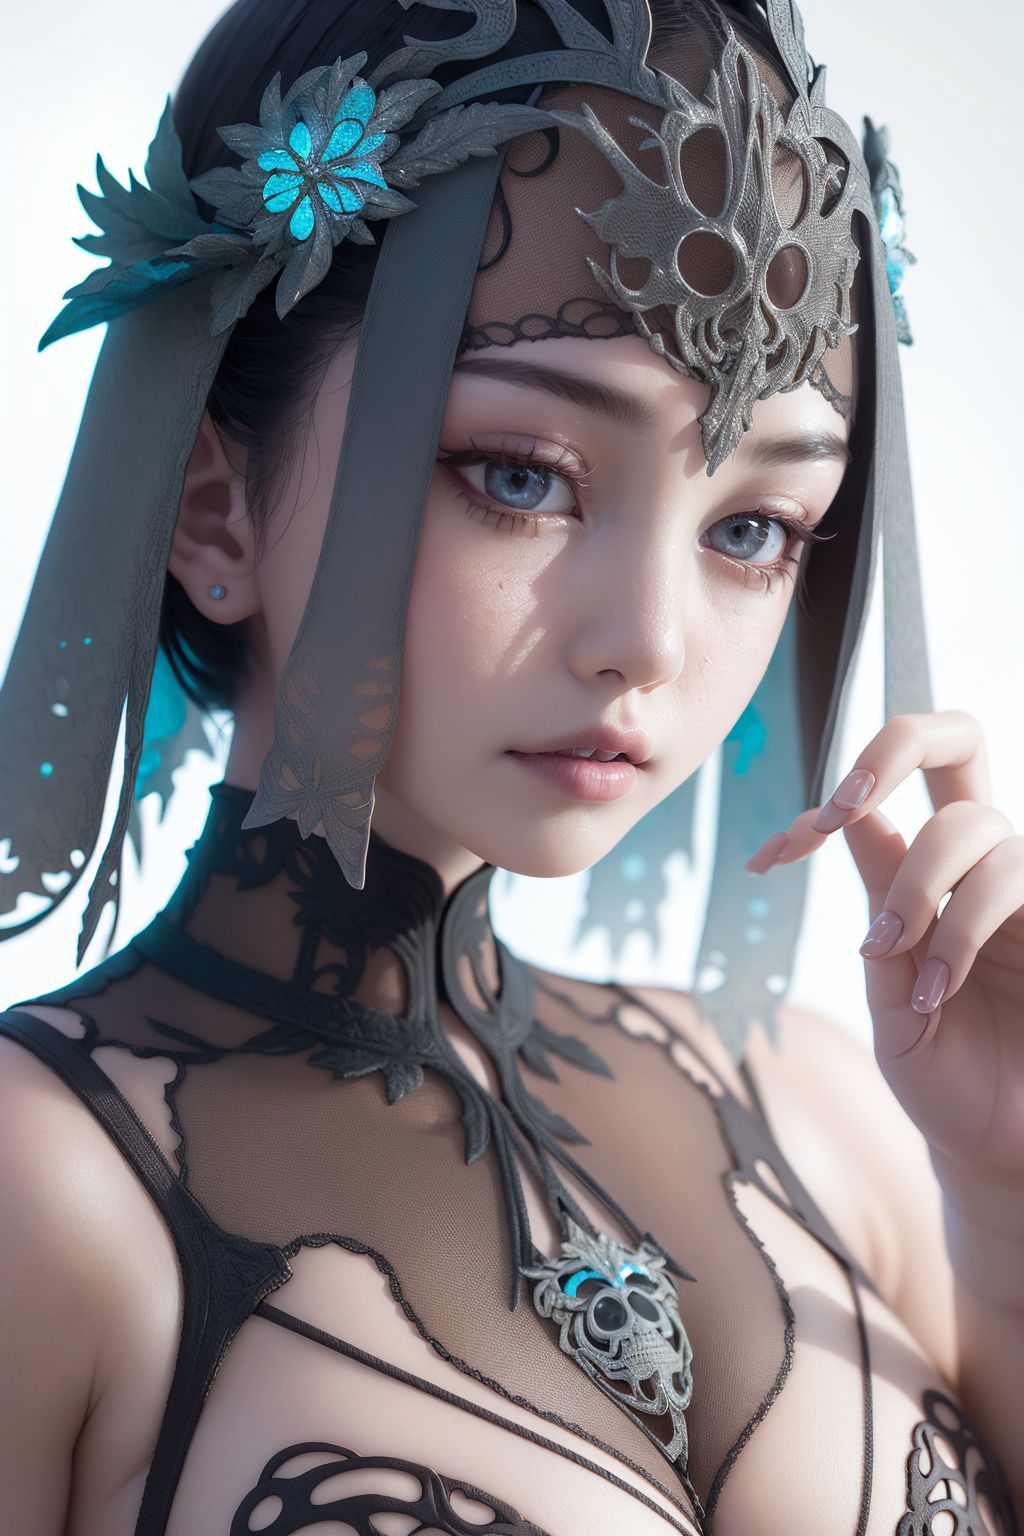 Artistic Eastern Fantasy Armor and Dress image by RalFinger